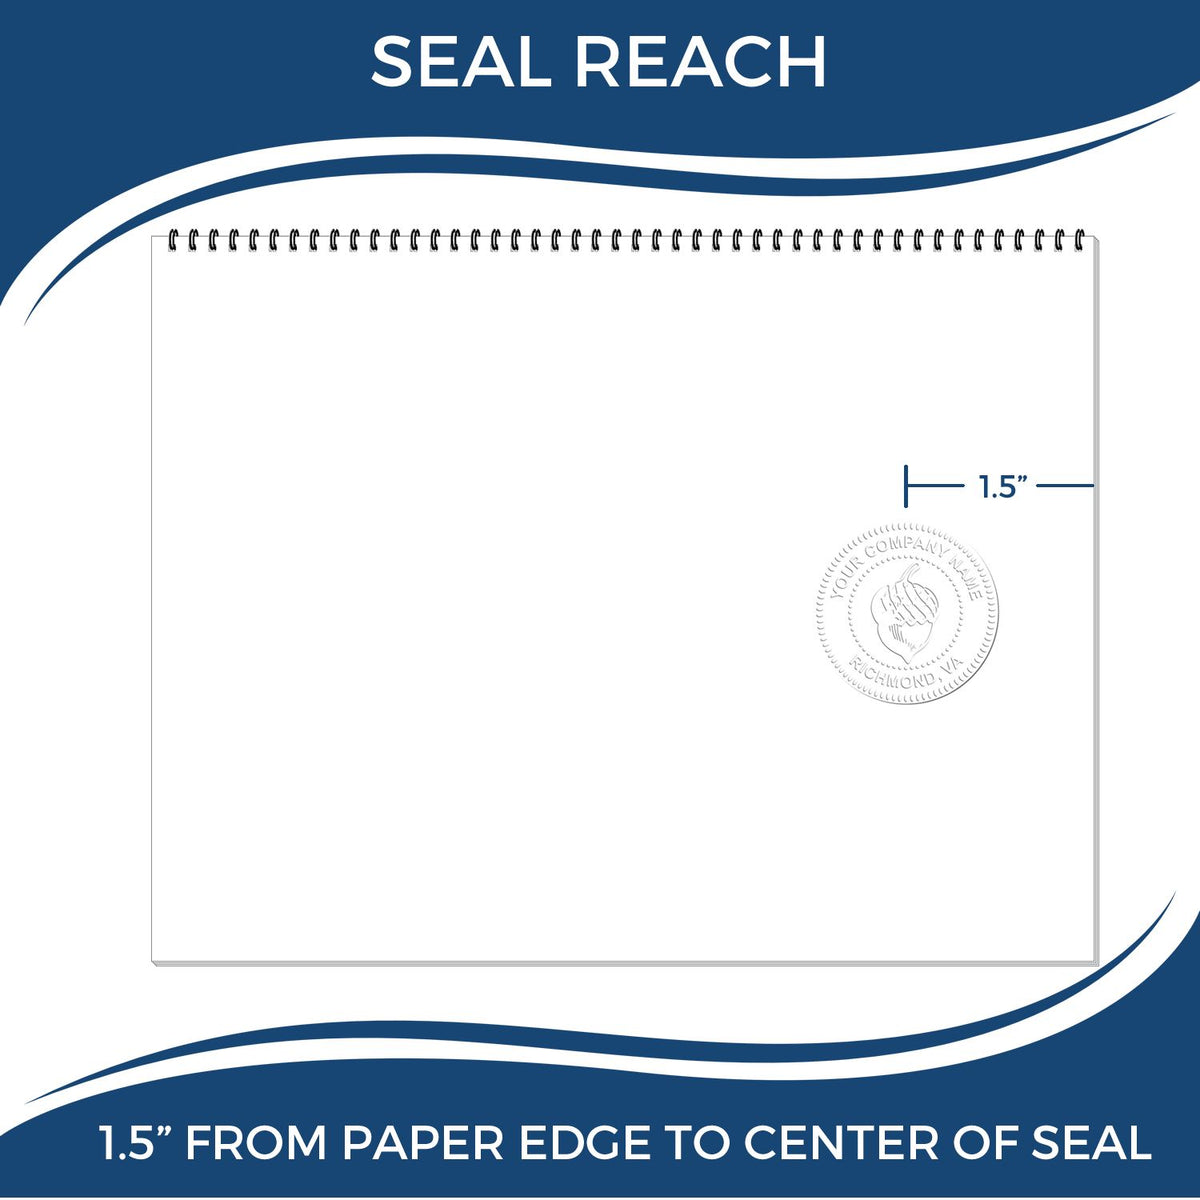 An infographic showing the seal reach which is represented by a ruler and a miniature seal image of the Hybrid Arkansas Geologist Seal